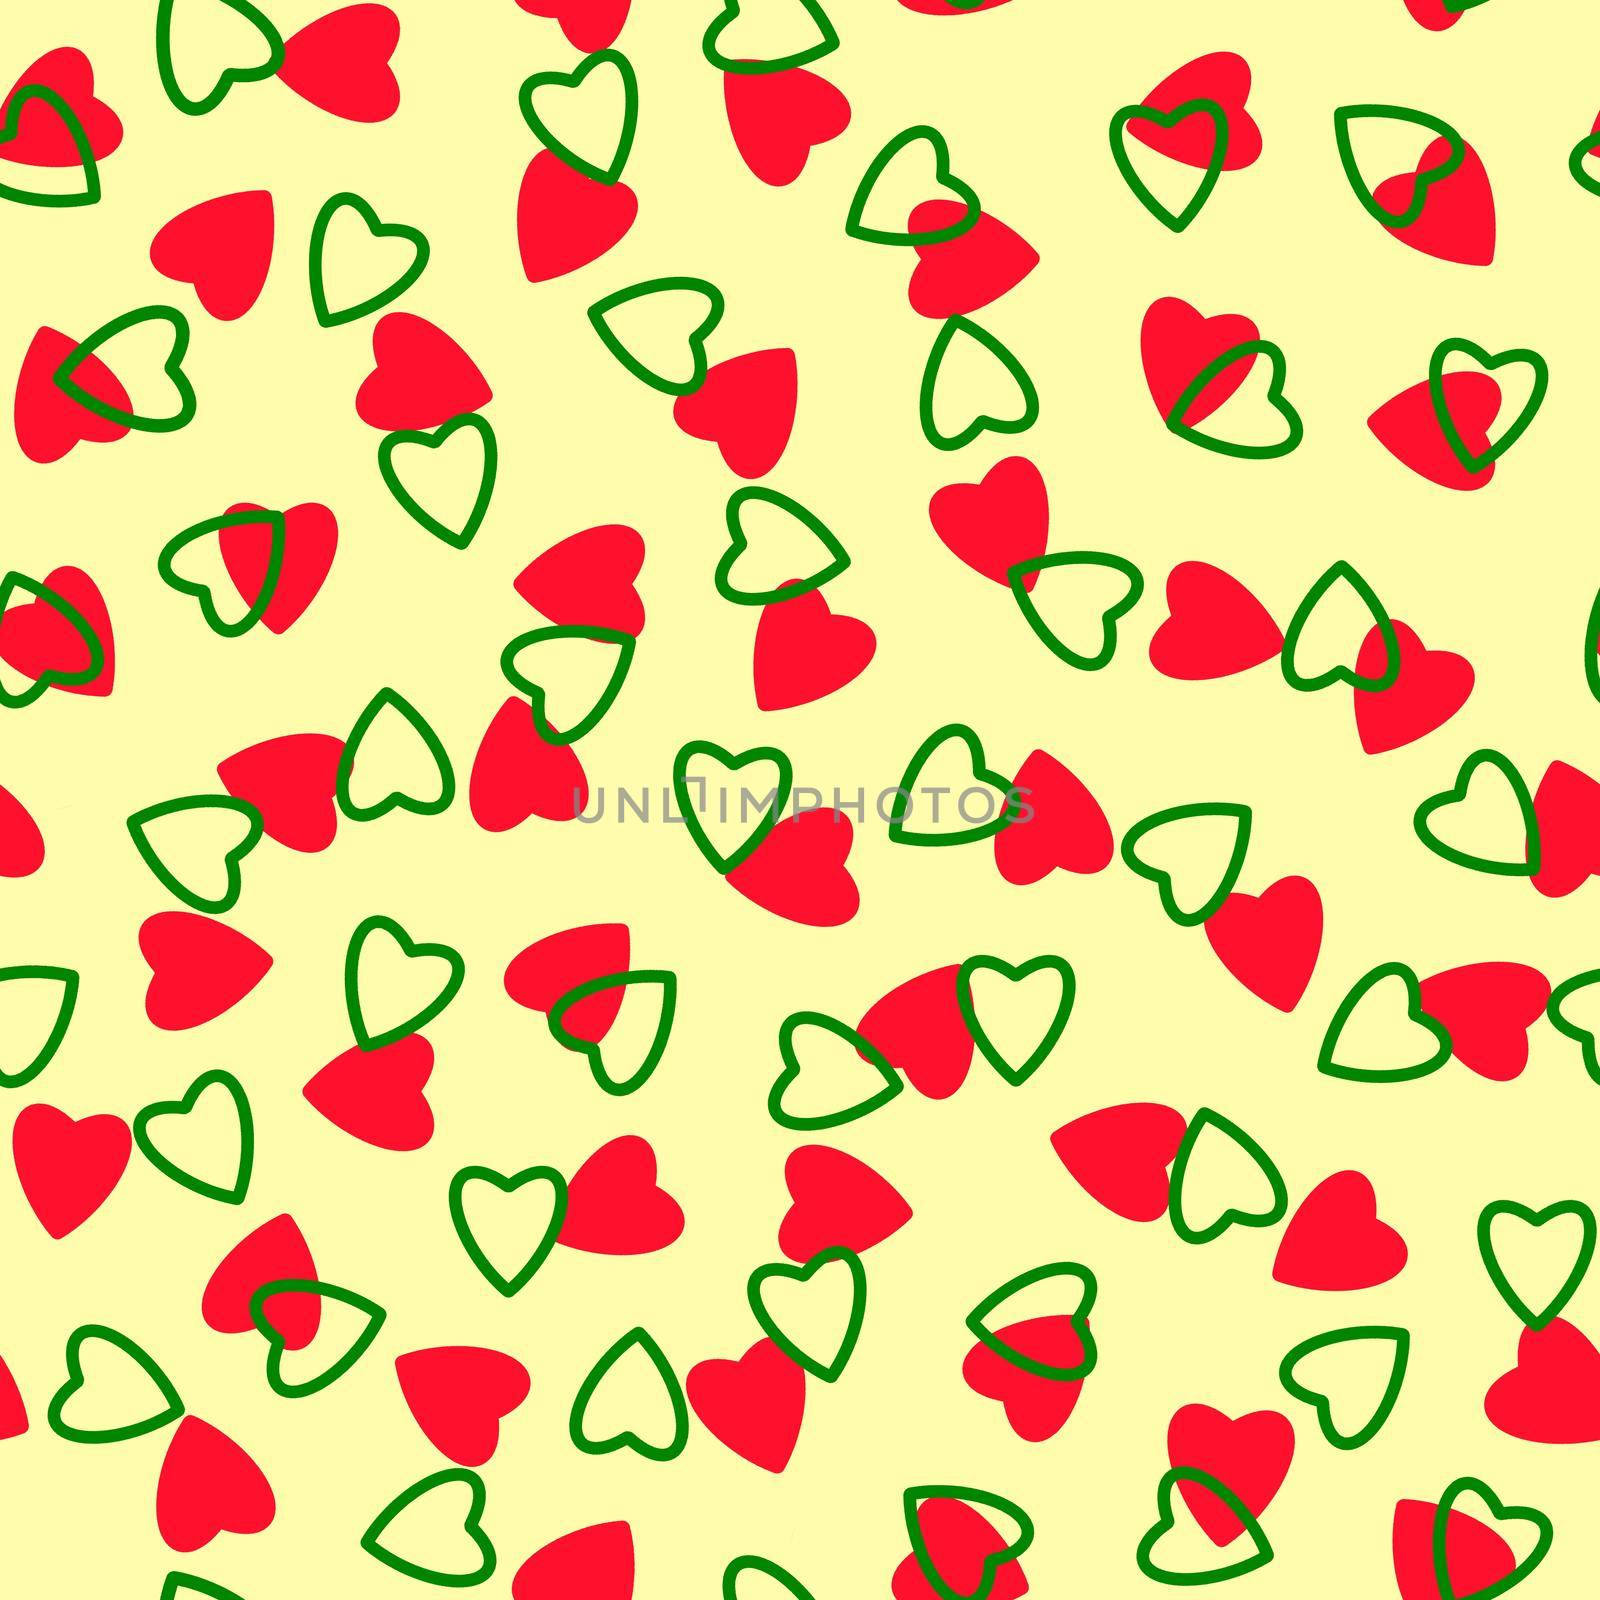 Simple hearts seamless pattern,endless chaotic texture made of tiny heart silhouettes.Valentines,mothers day background.Great for Easter,wedding,scrapbook,gift wrapping paper,textiles.Red,green,Ivory by Angelsmoon